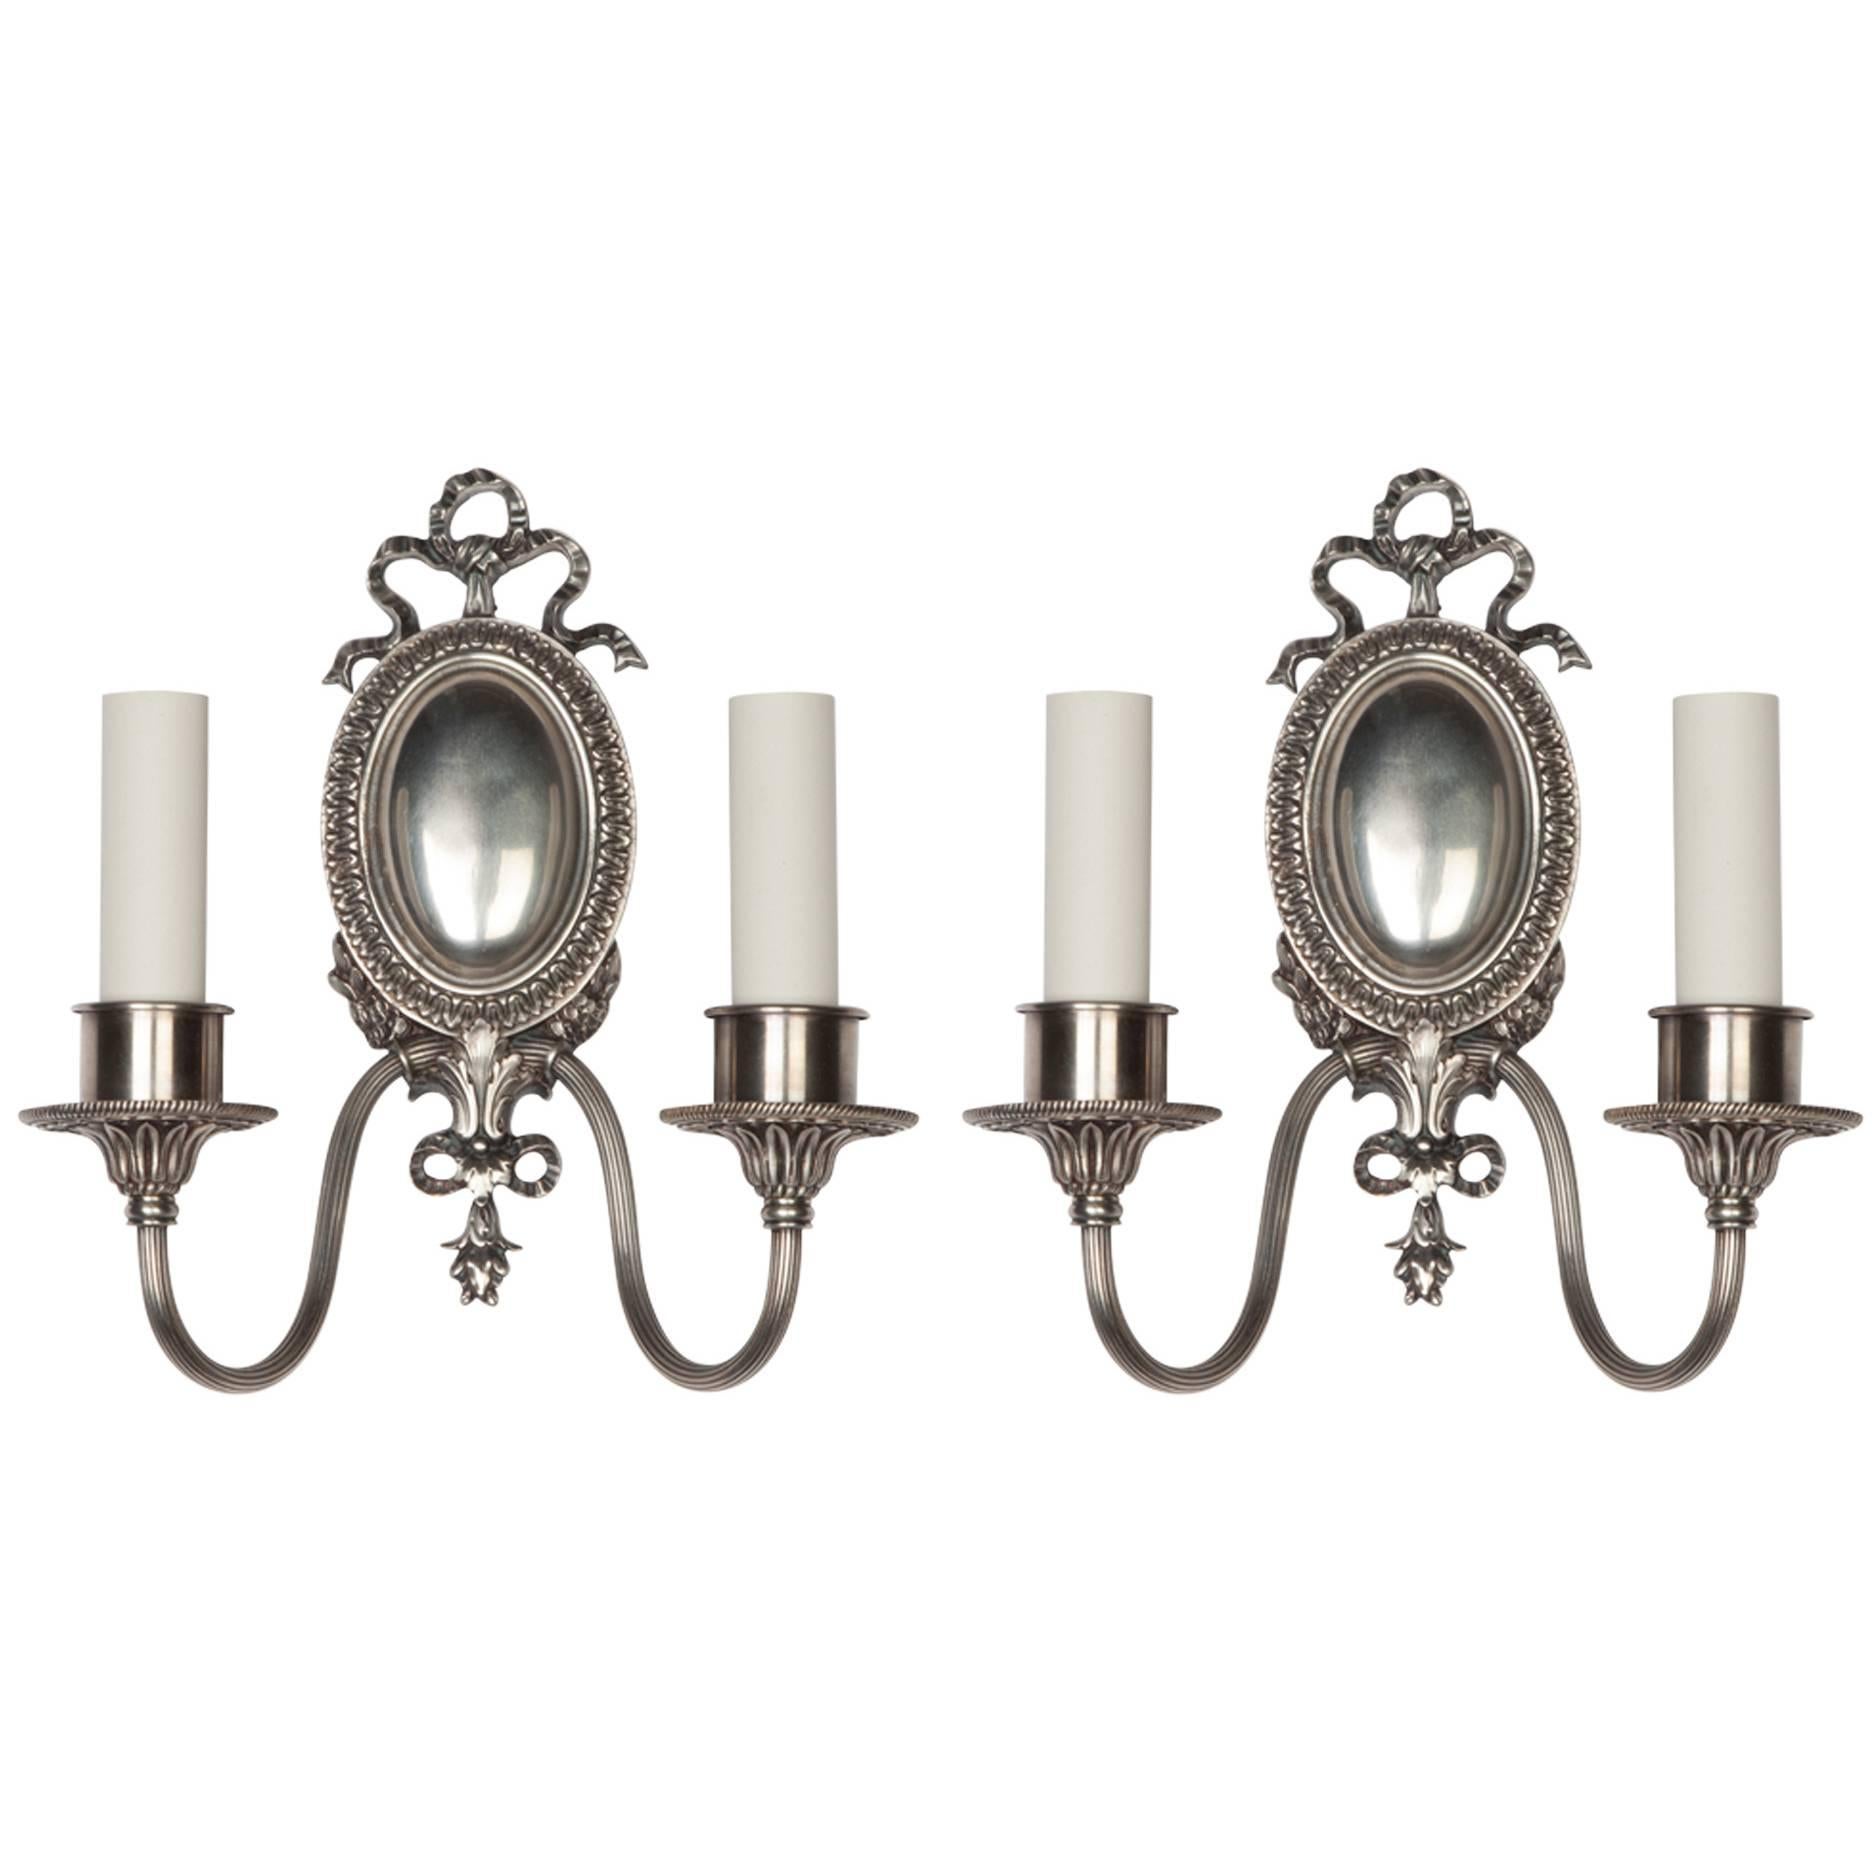 Antique Nickel Double Light Sconces By Sterling Bronze Co.